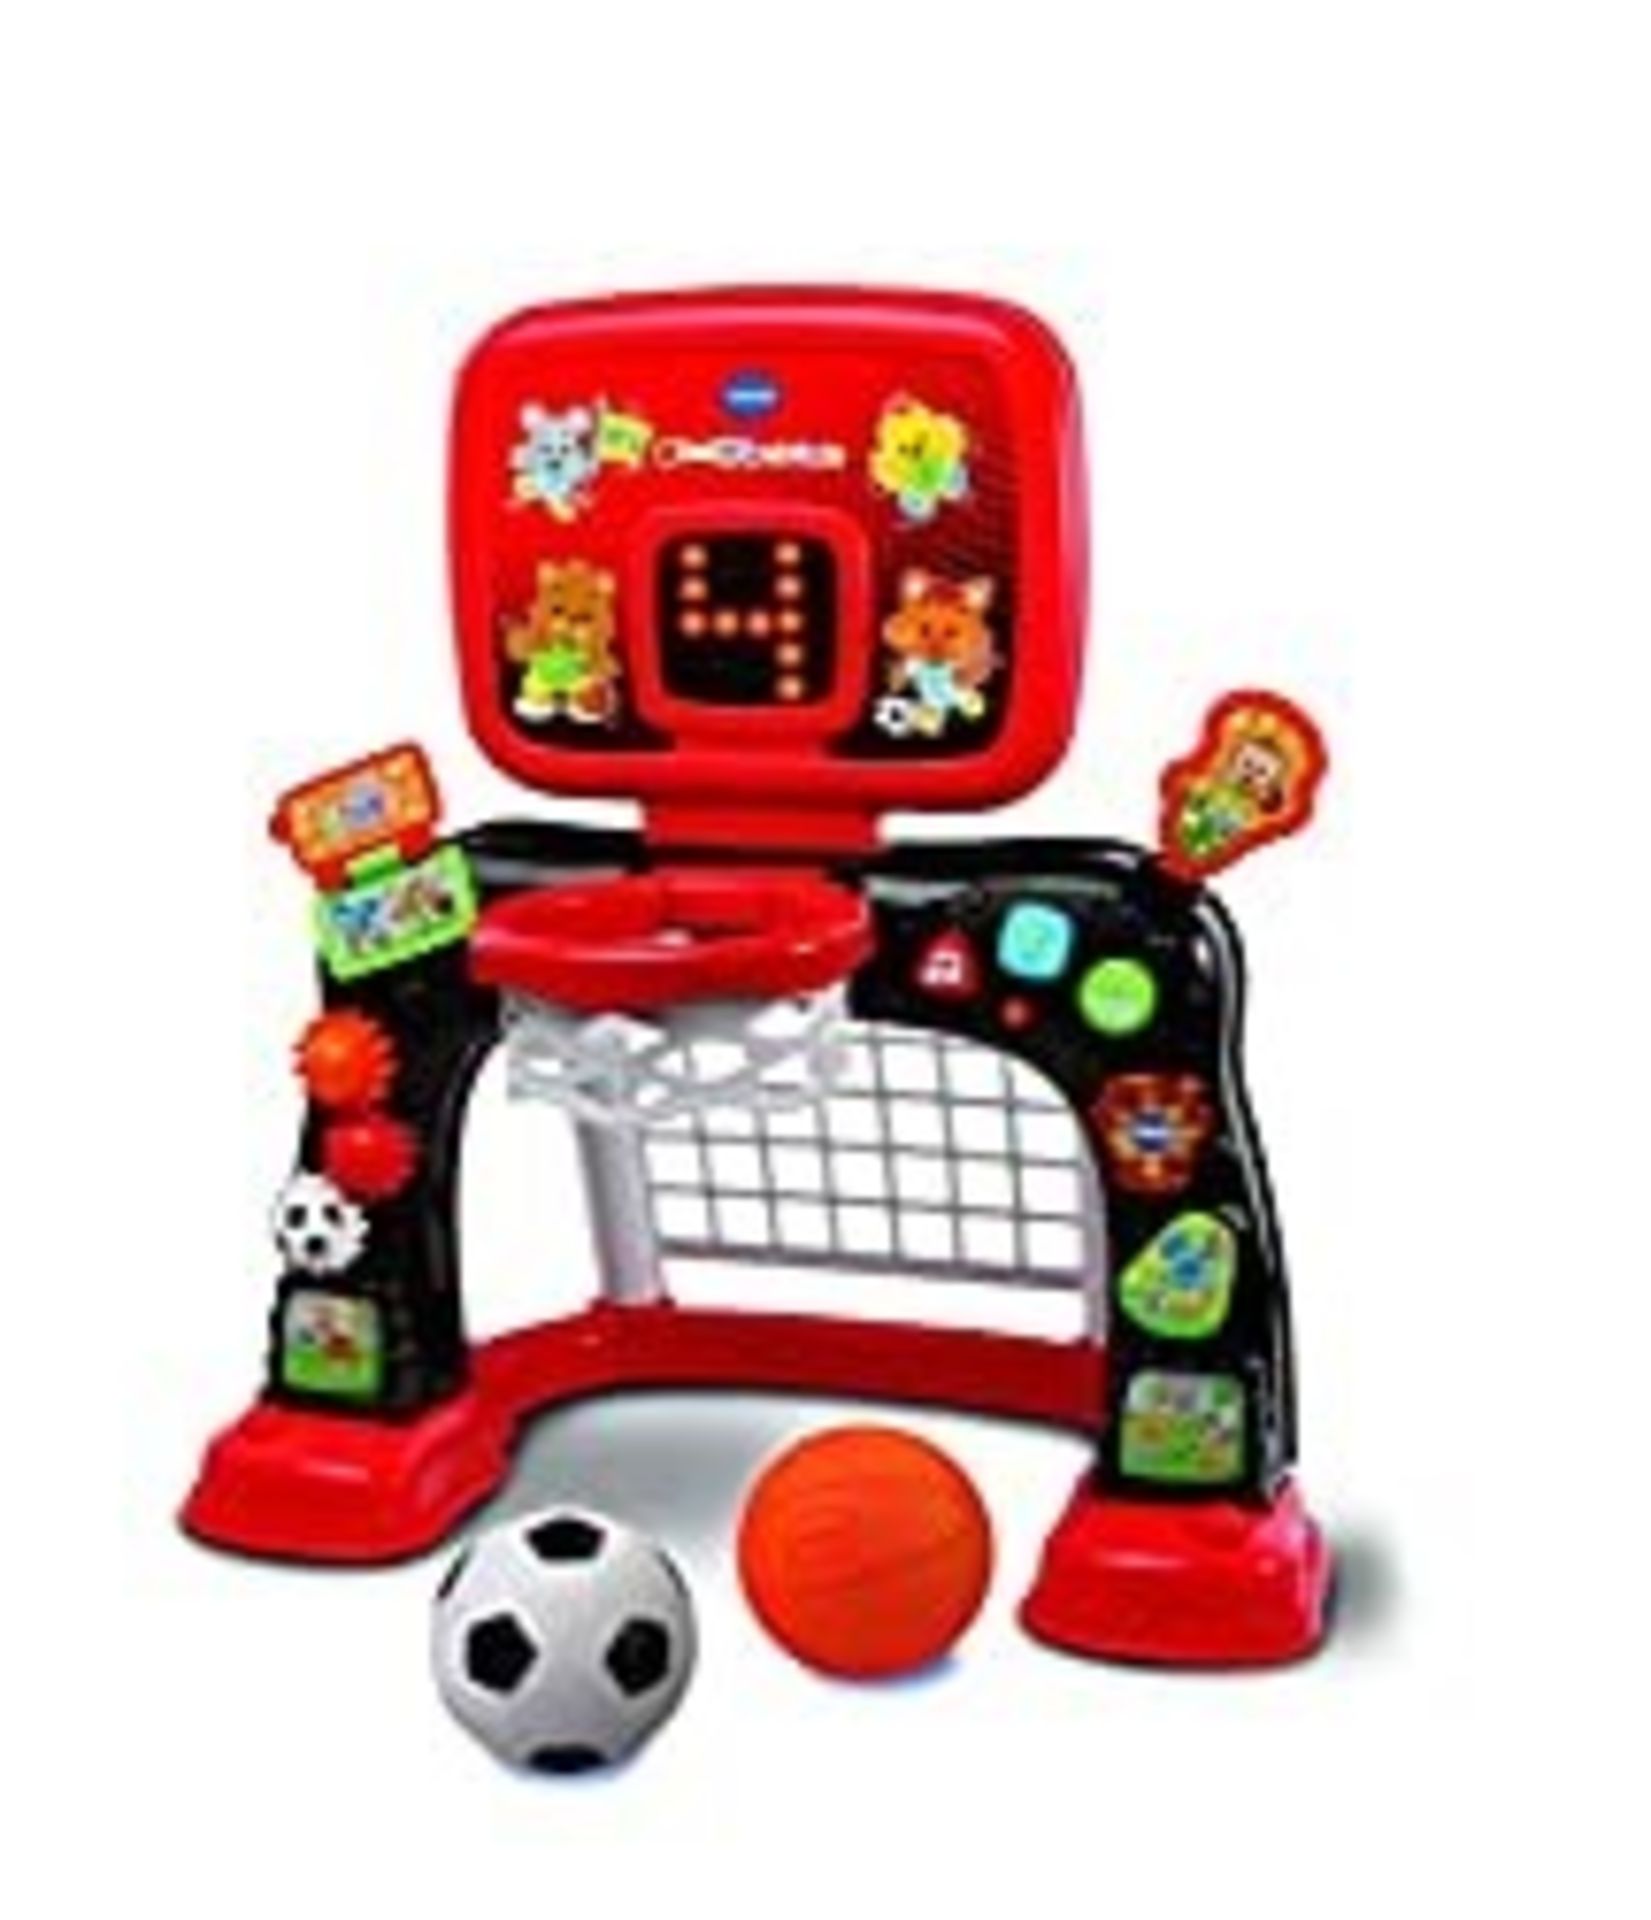 VTech 2-in-1 Sports Centre, Baby Interactive Toy with Colours and Sounds, Educational Games for - Image 3 of 4